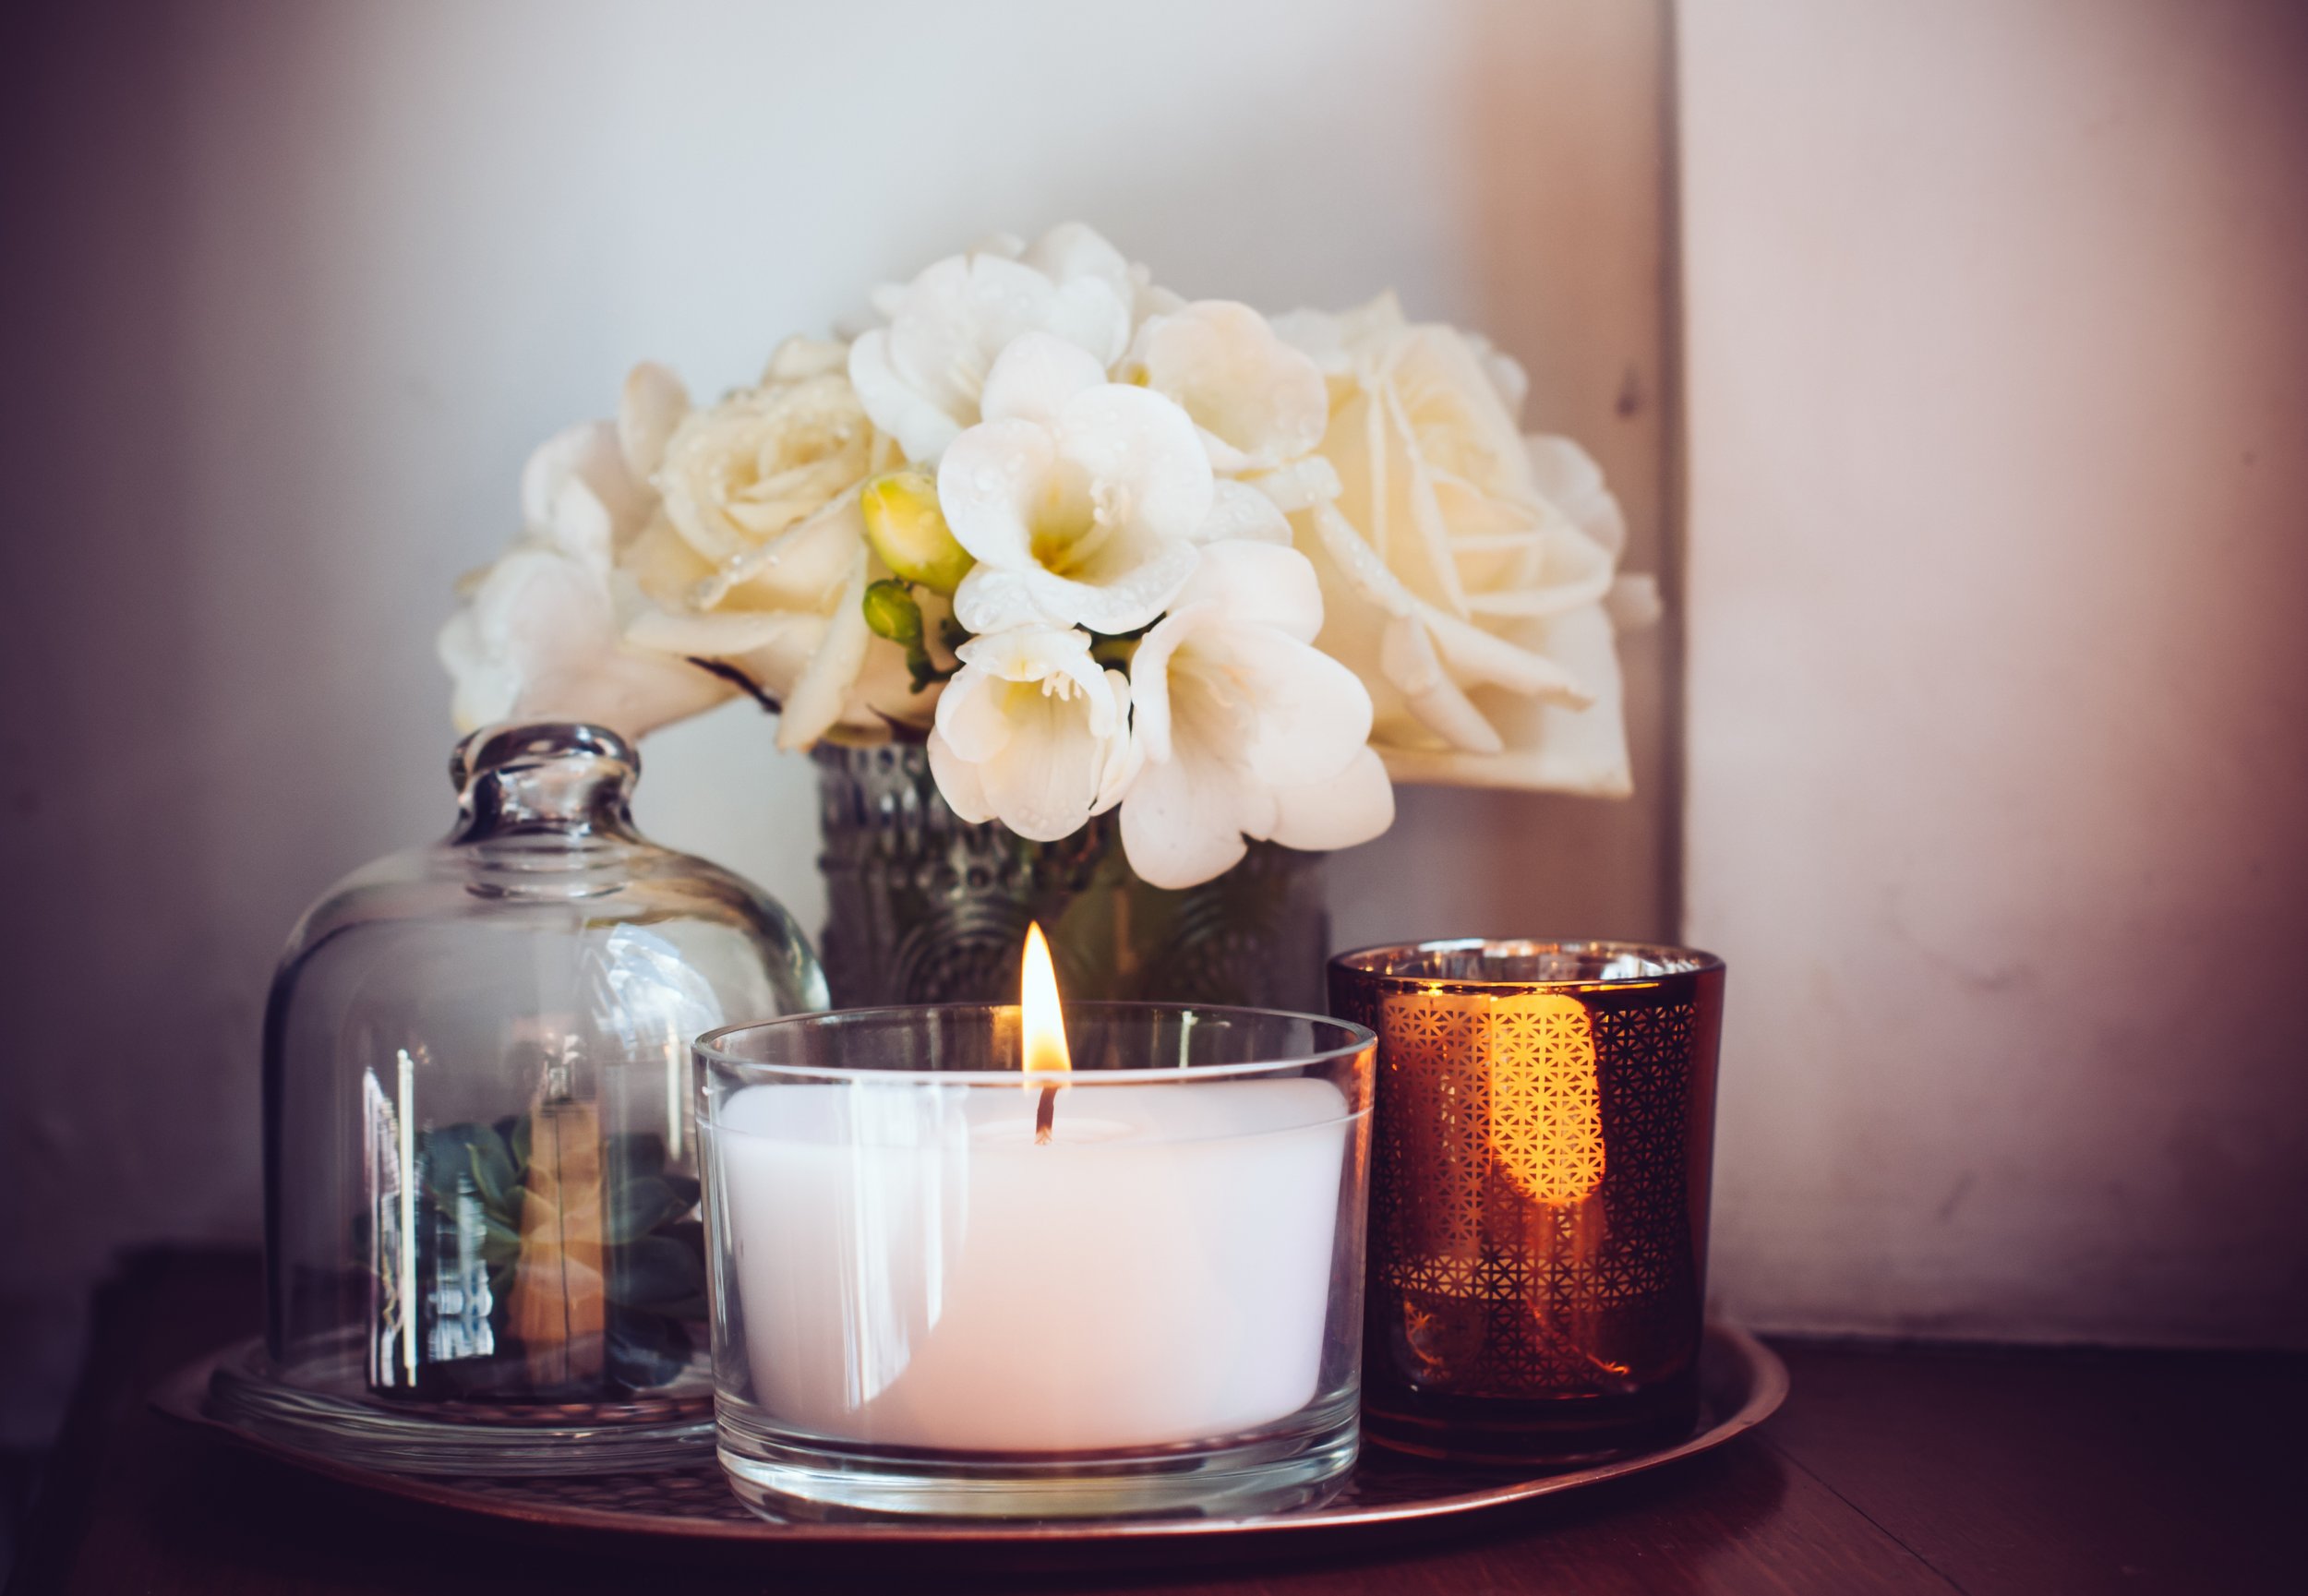 Candle with white flowers.jpg